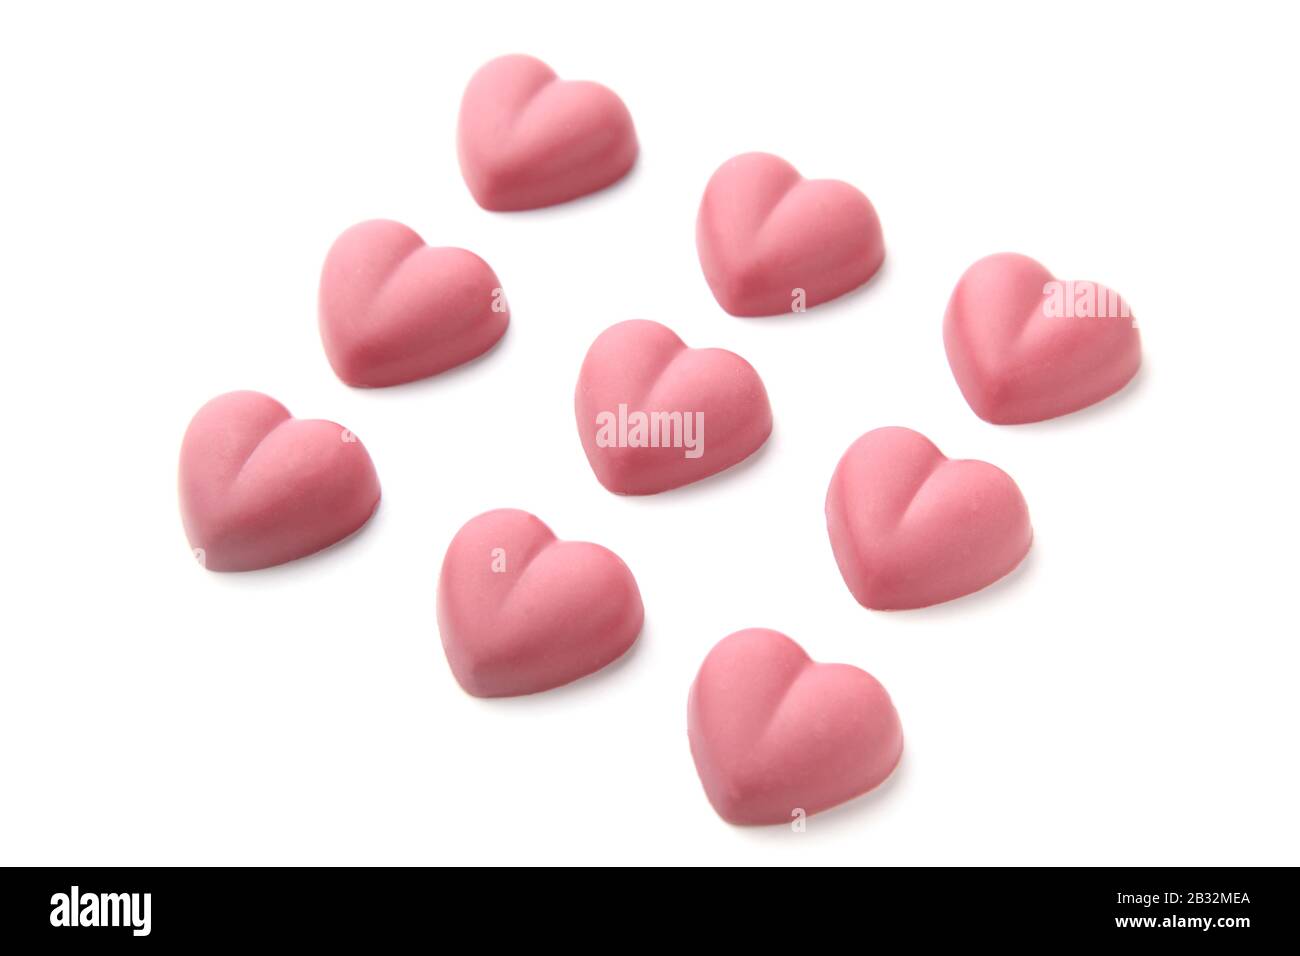 heart shaped pink ruby chocolate closeup isolated on white background Stock Photo